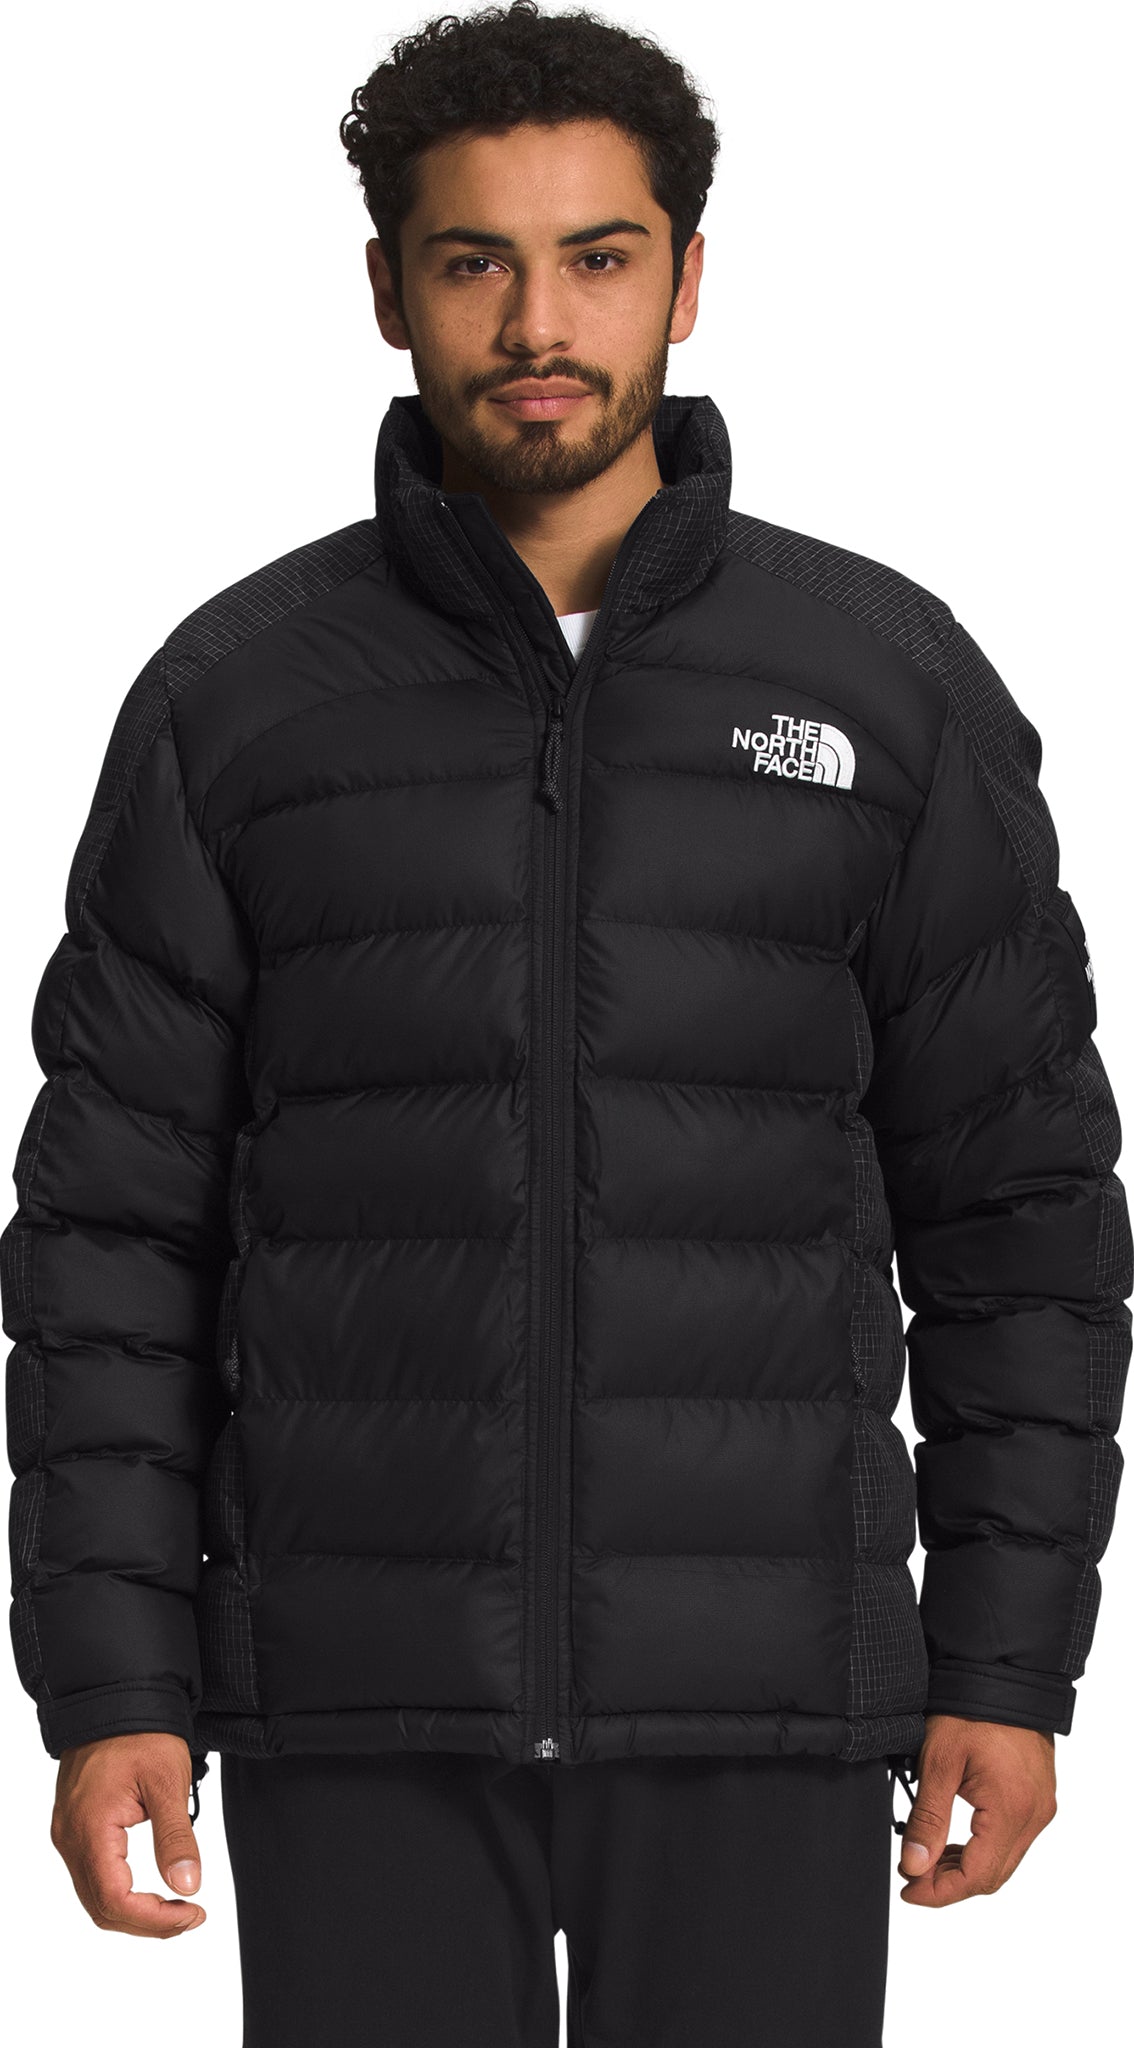 The North Face Rusta Puffer Jacket - Men's | Altitude Sports